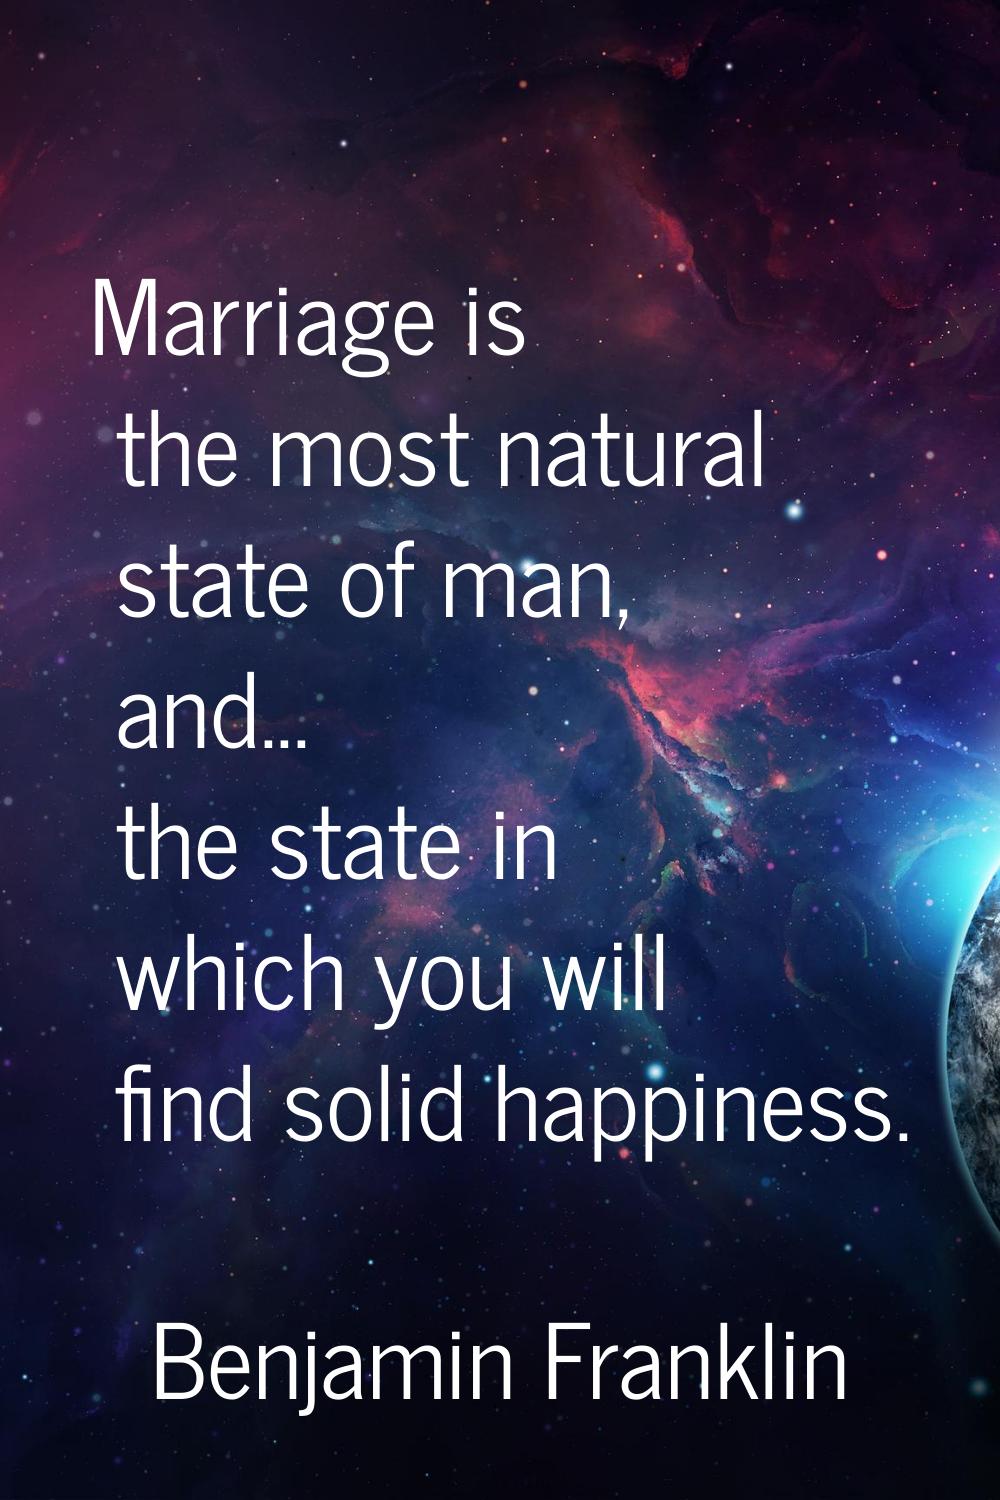 Marriage is the most natural state of man, and... the state in which you will find solid happiness.